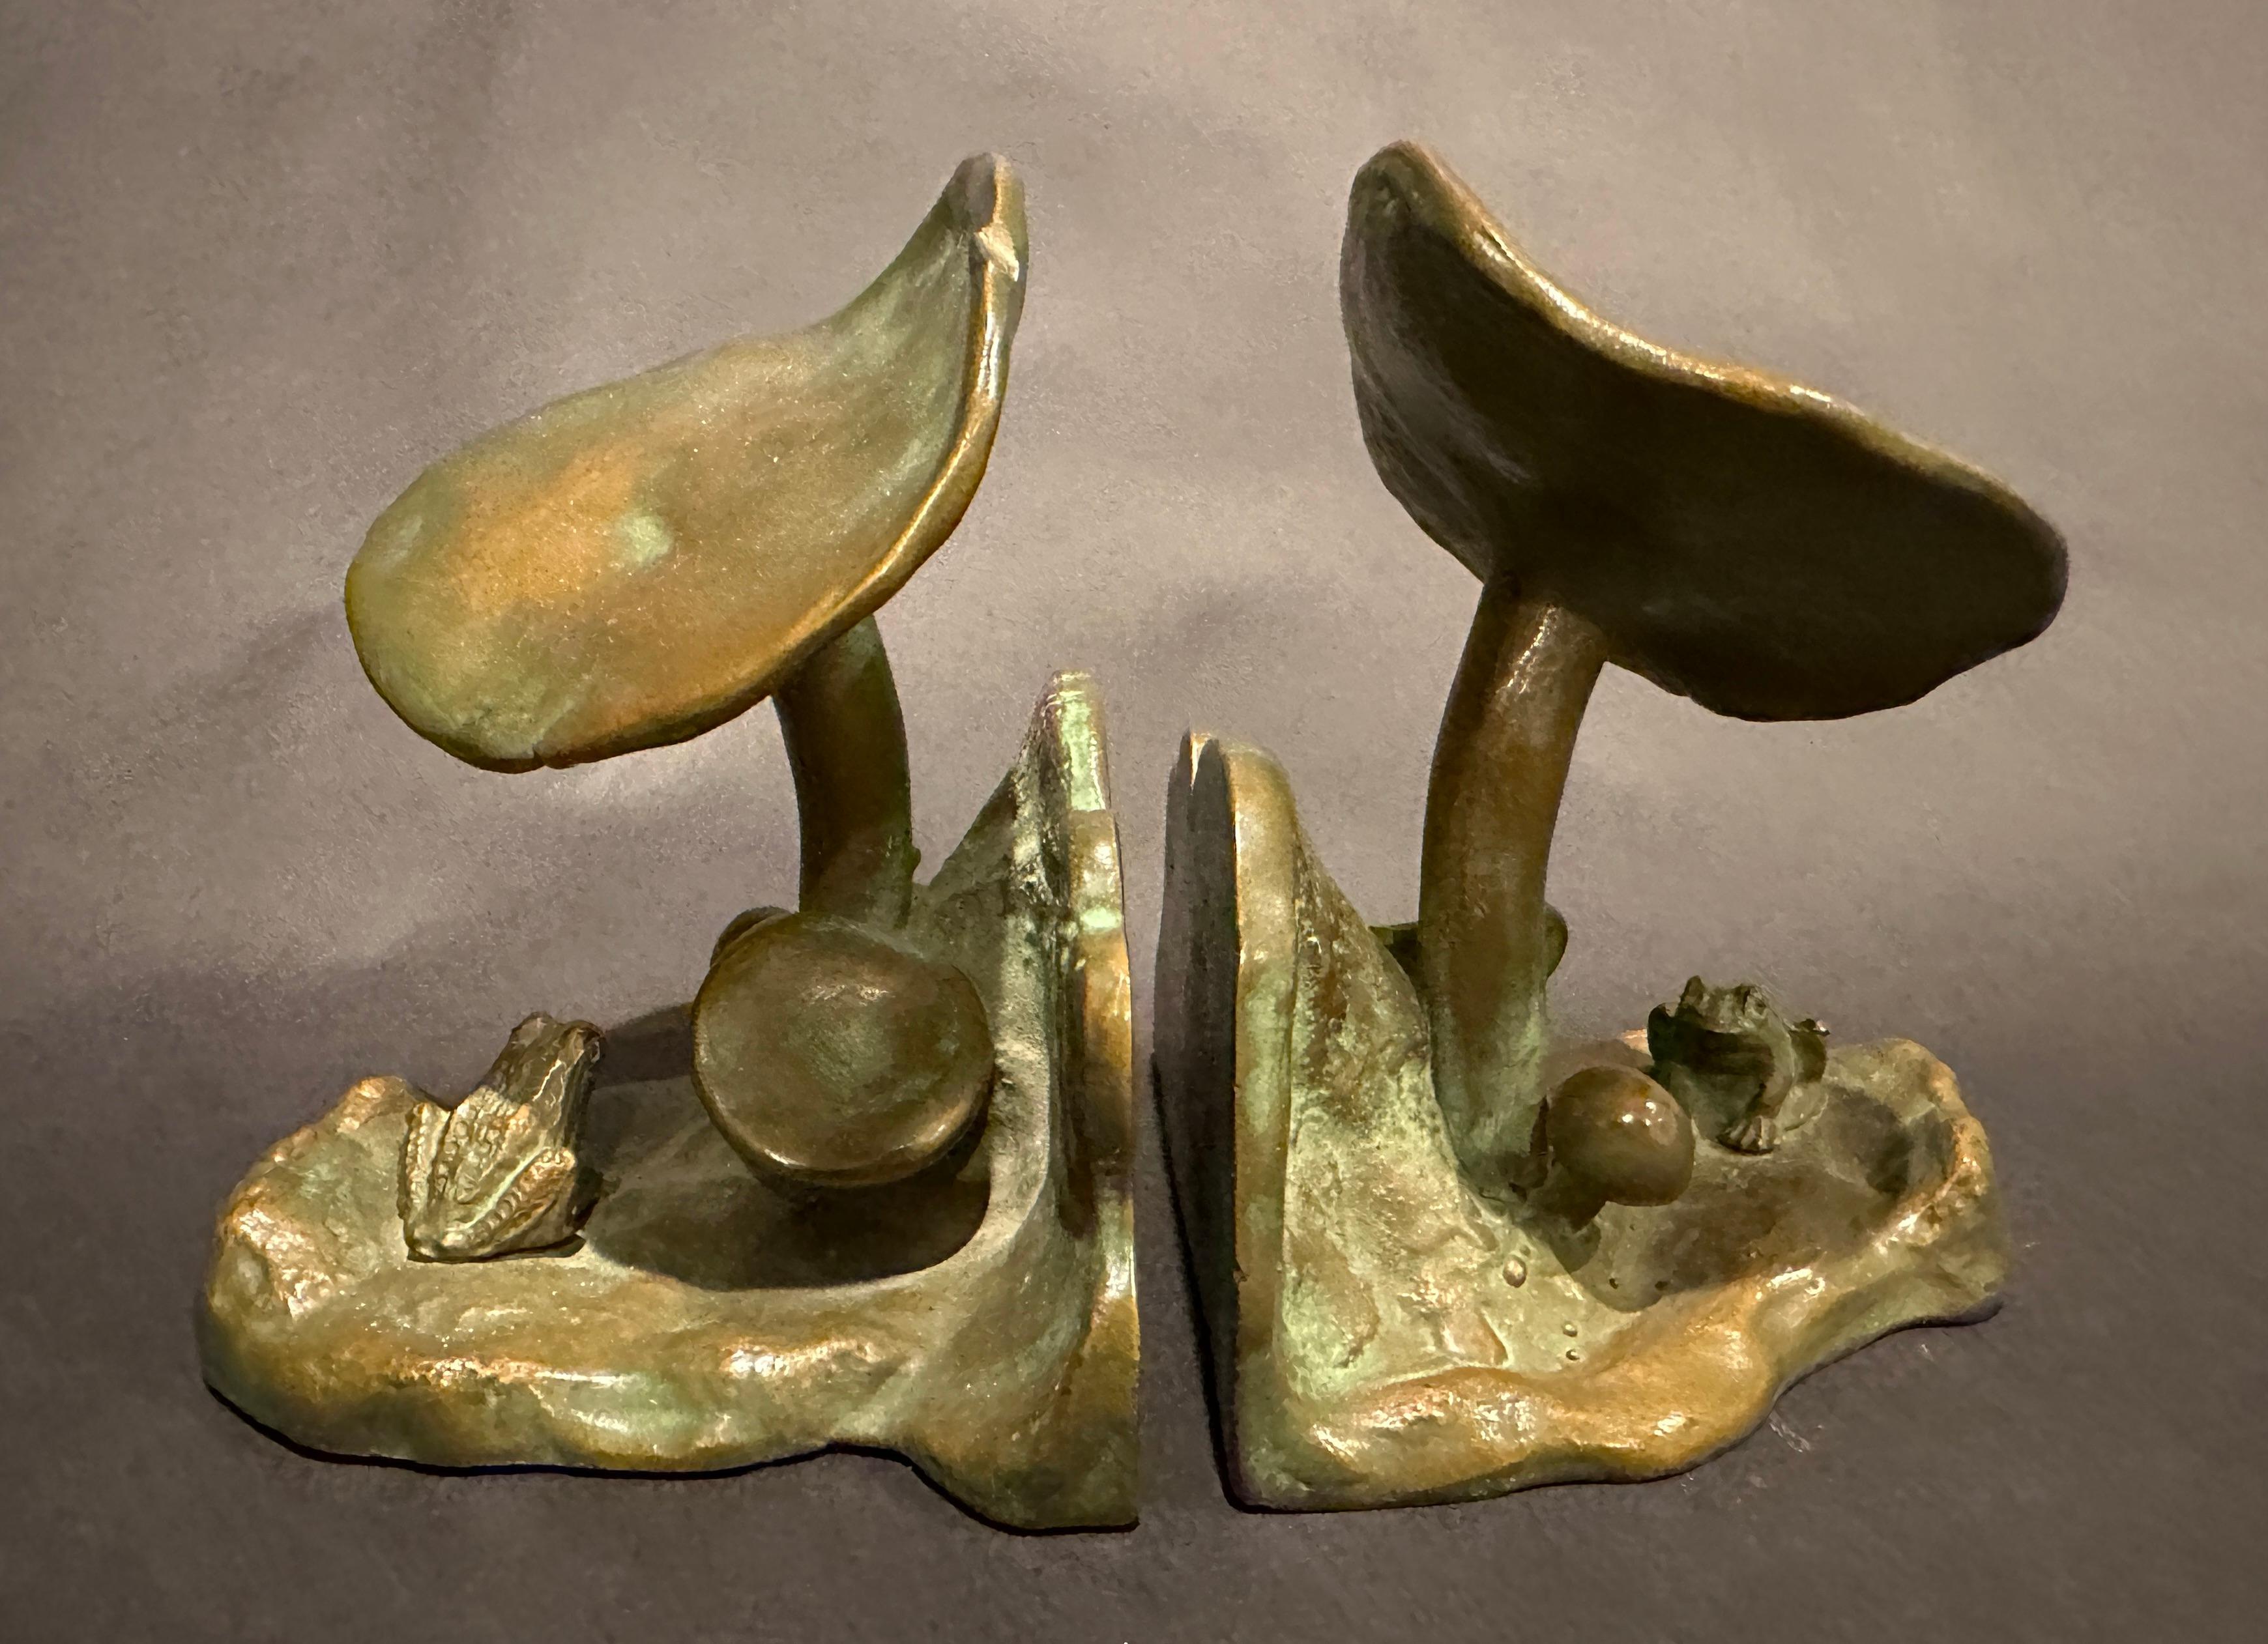 Pair of bronze mushroom and frog motif bookends by McClelland Barclay McClelland Barclay (1891-1943), American sculptor In two parts, each one beautifully cast of a landscape with mushrooms and a seated frog, inscribed signature on back Each bookend